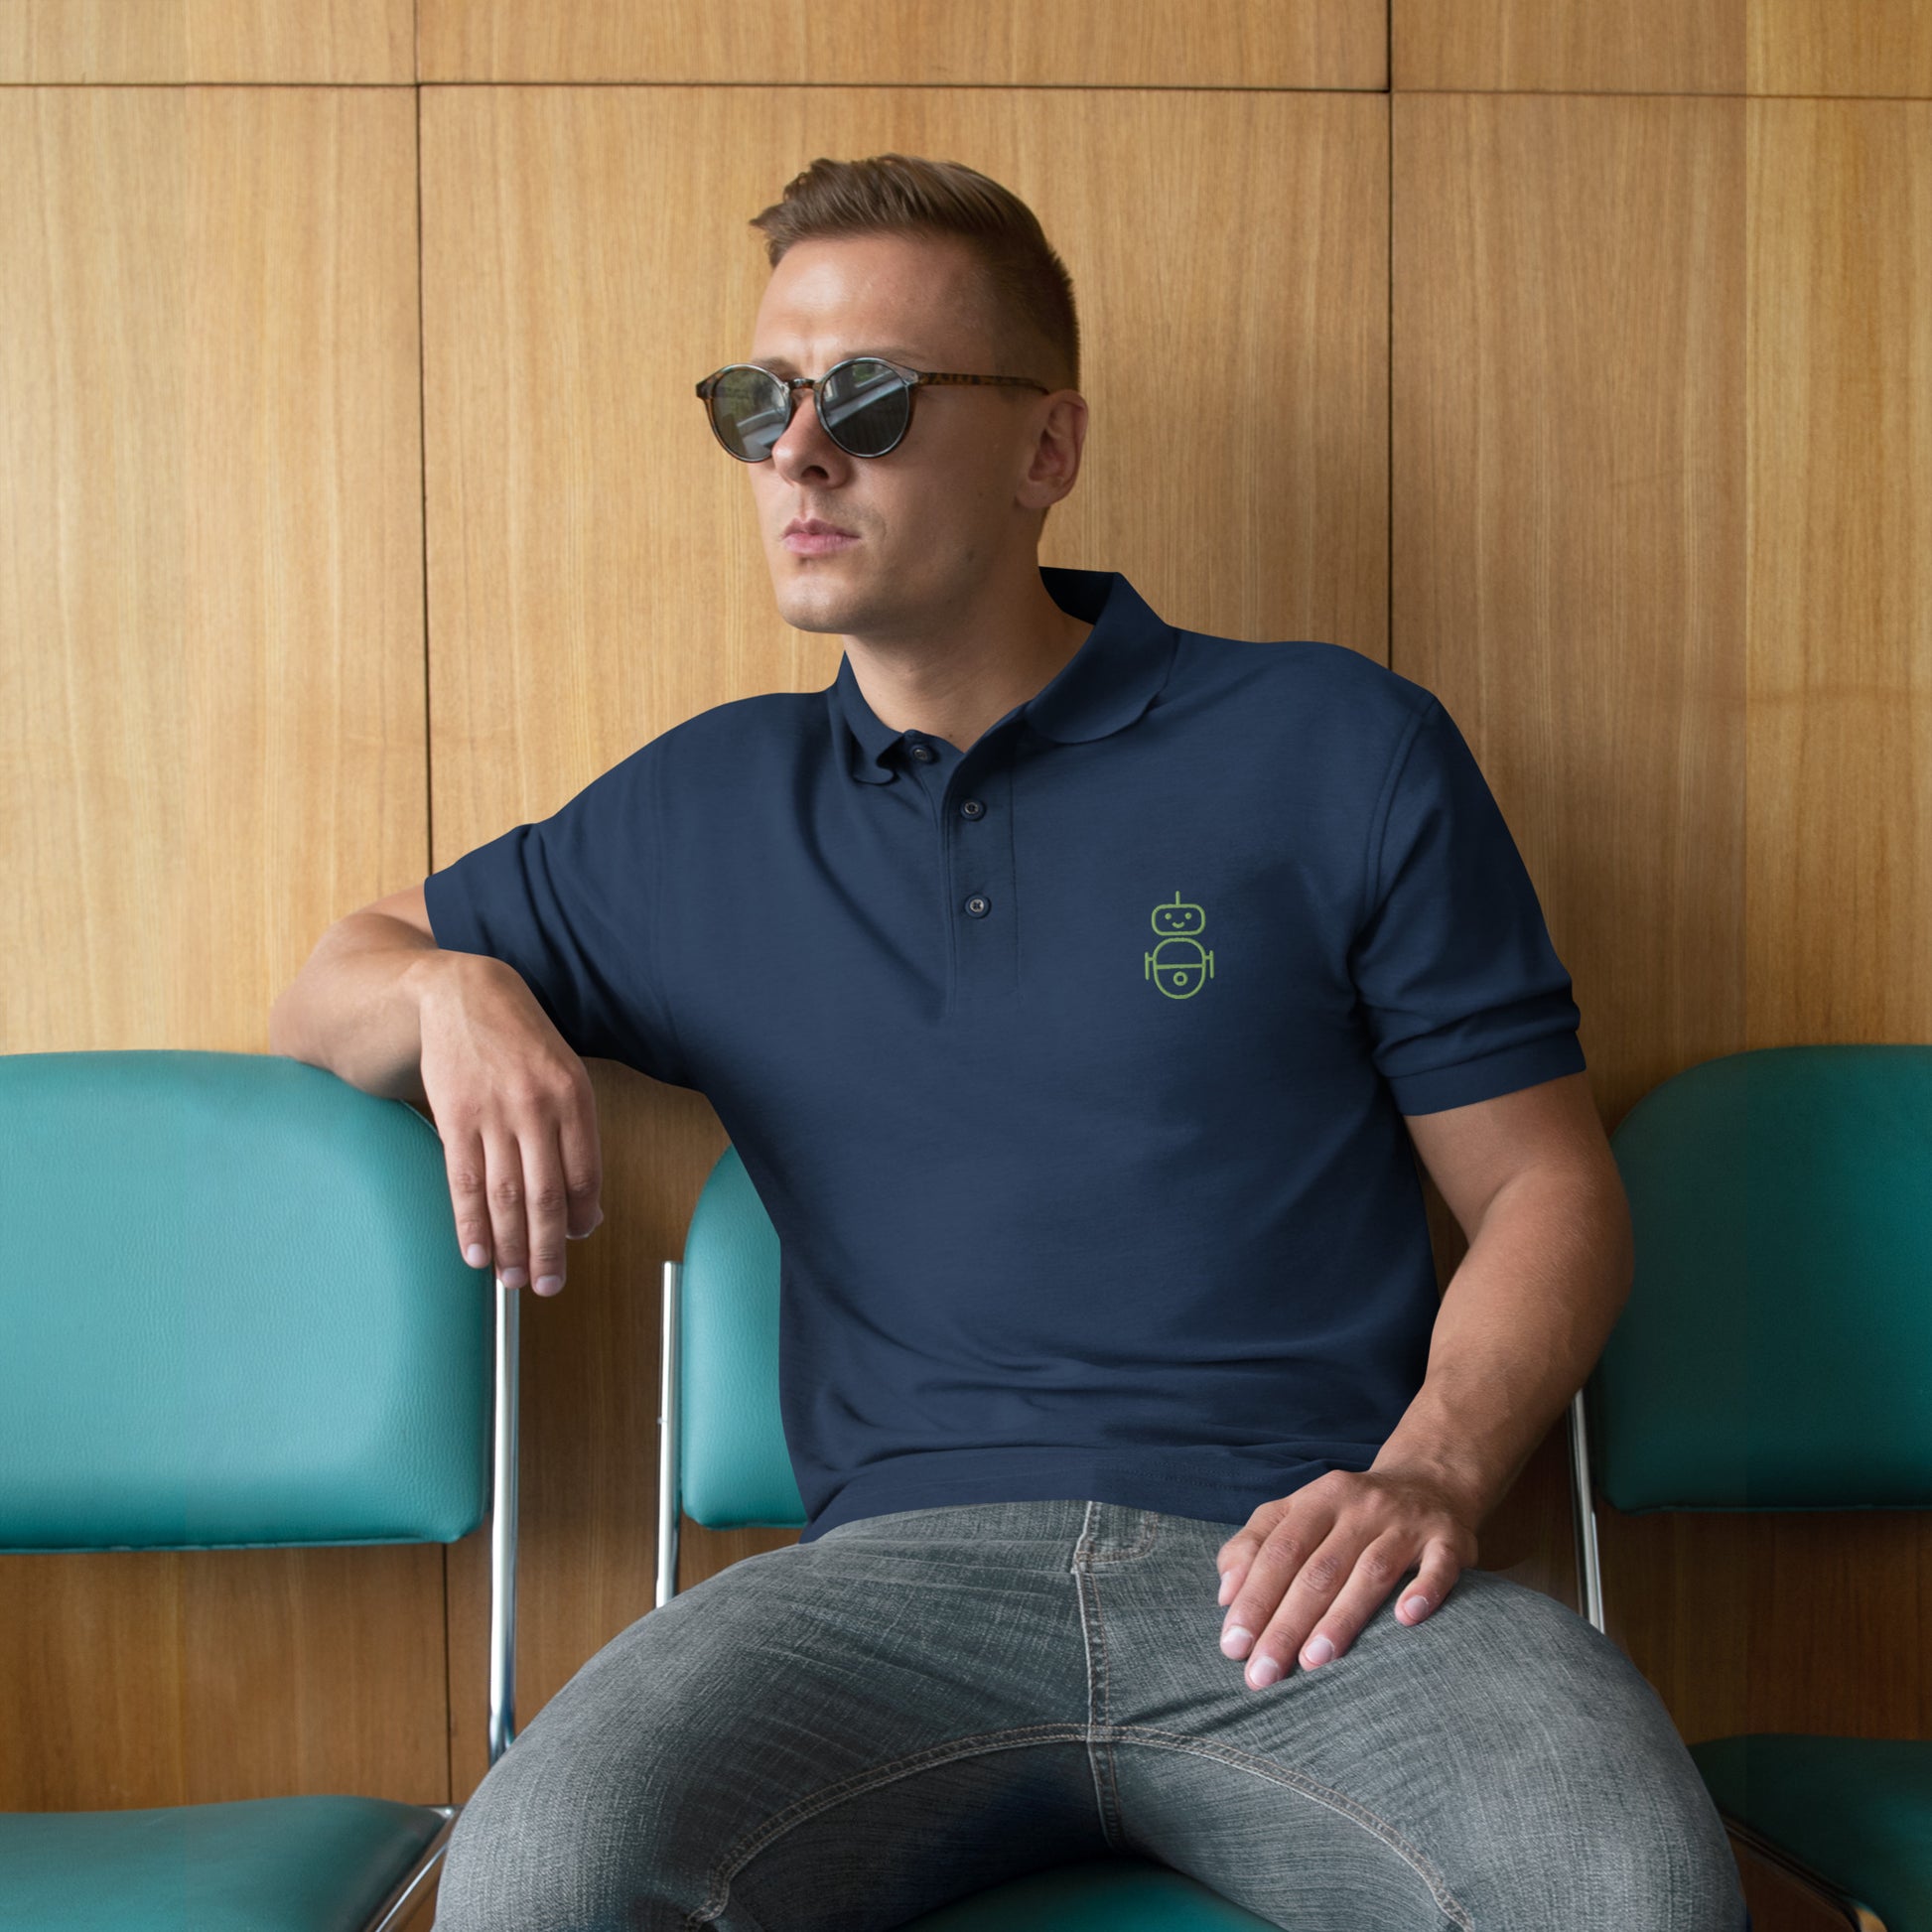 Men with navy polo and in green it Android logo